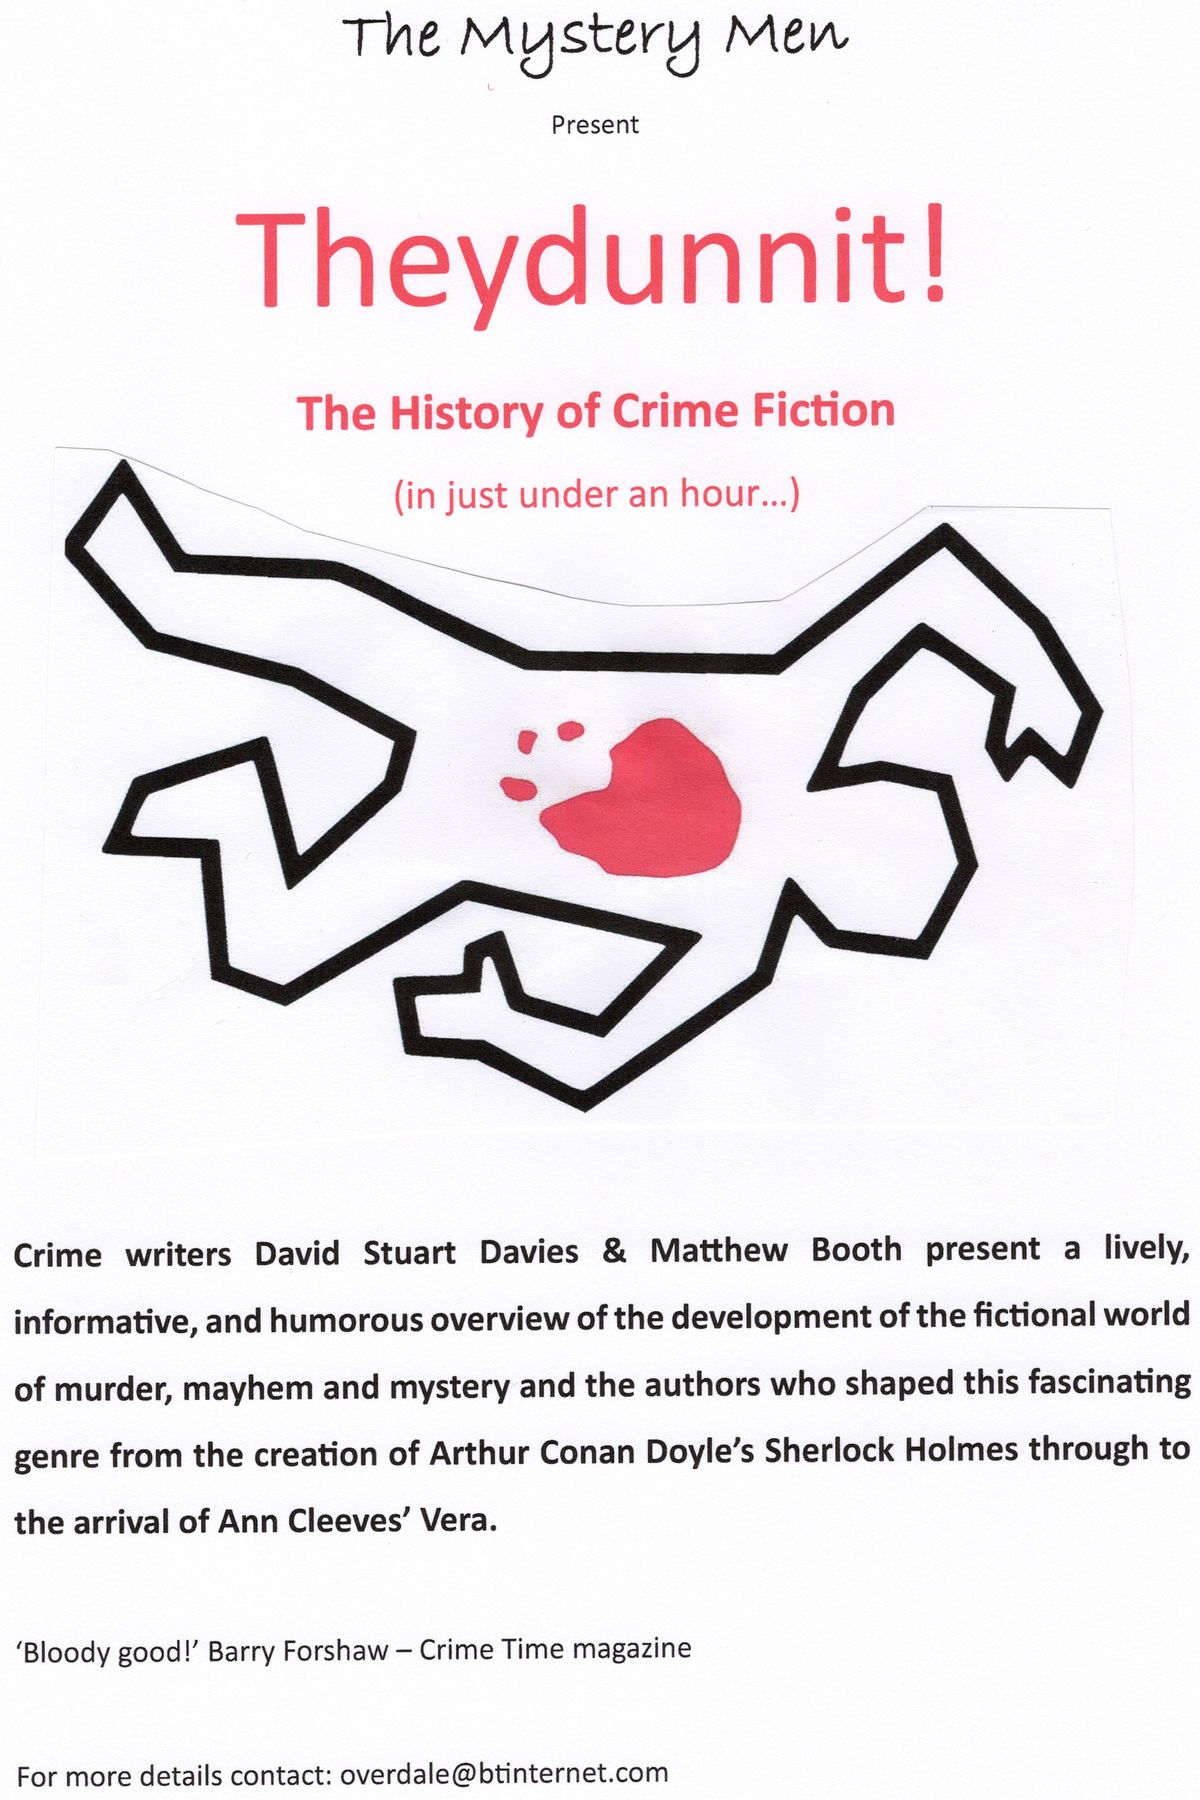 Theydunnit: The History of Crime Fiction (in just under a hour)